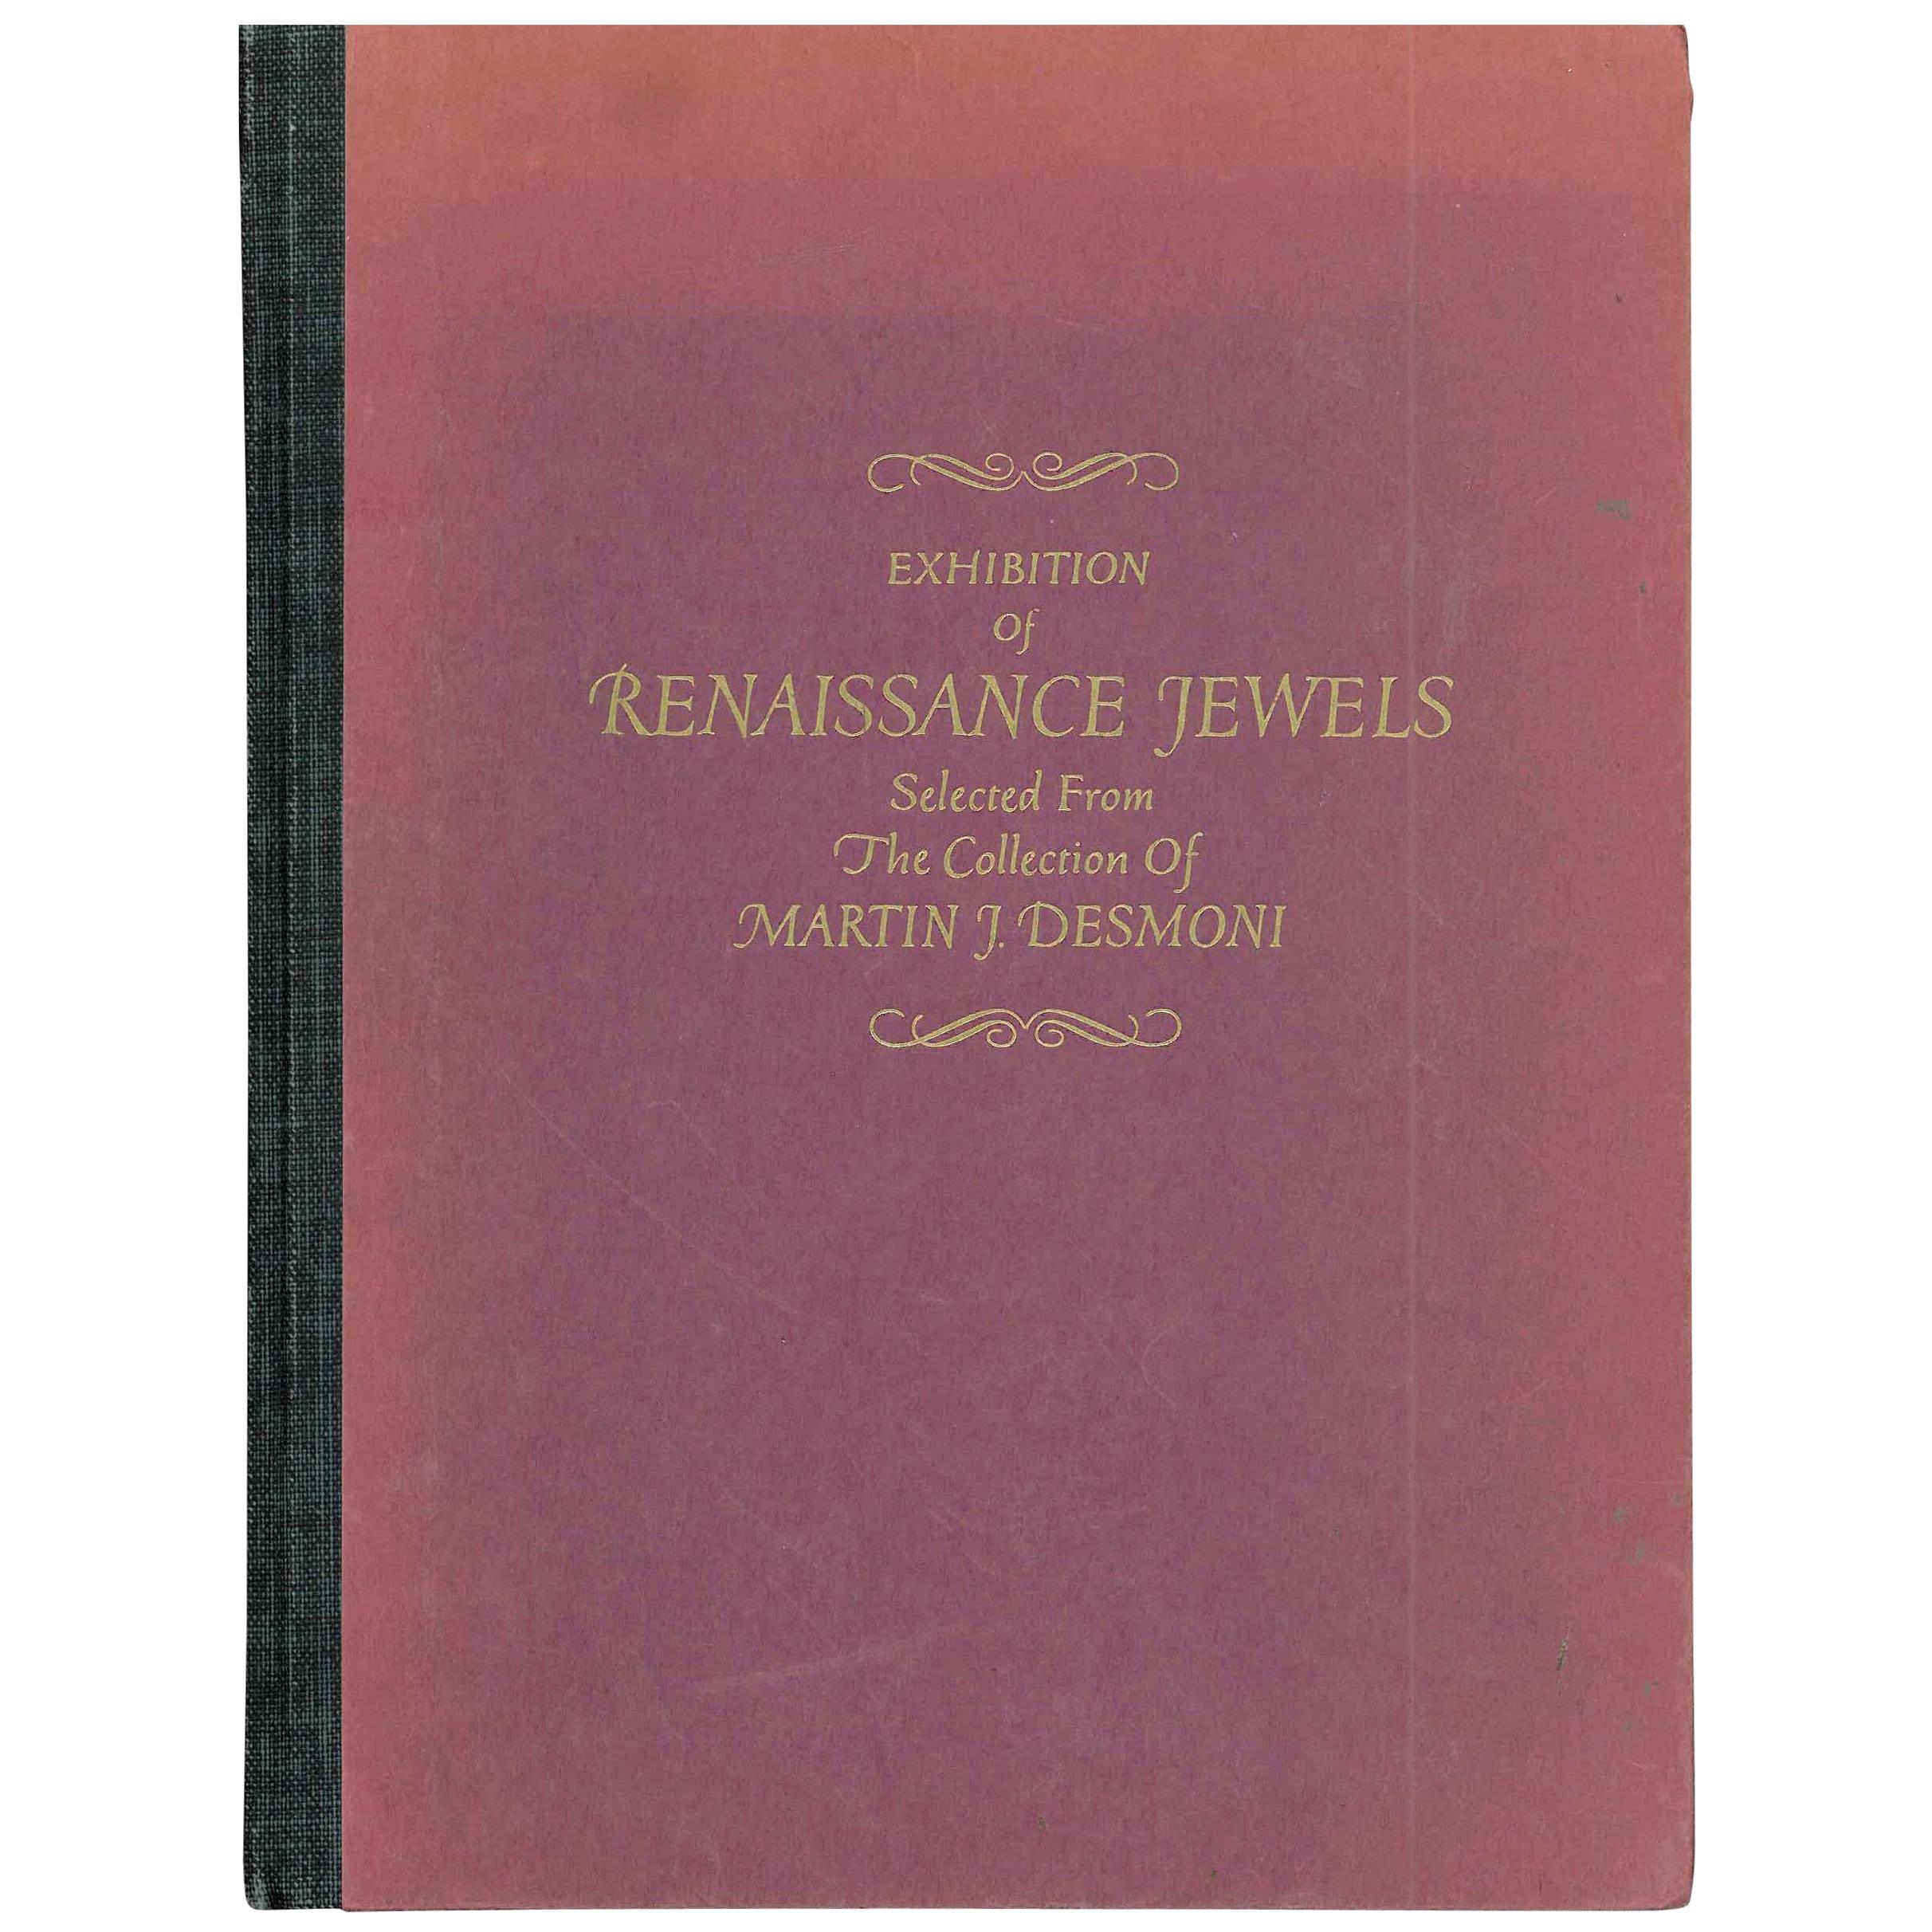 Book of Exhibition of Renaissance Jewels from the Martin J. Desmoni Collection